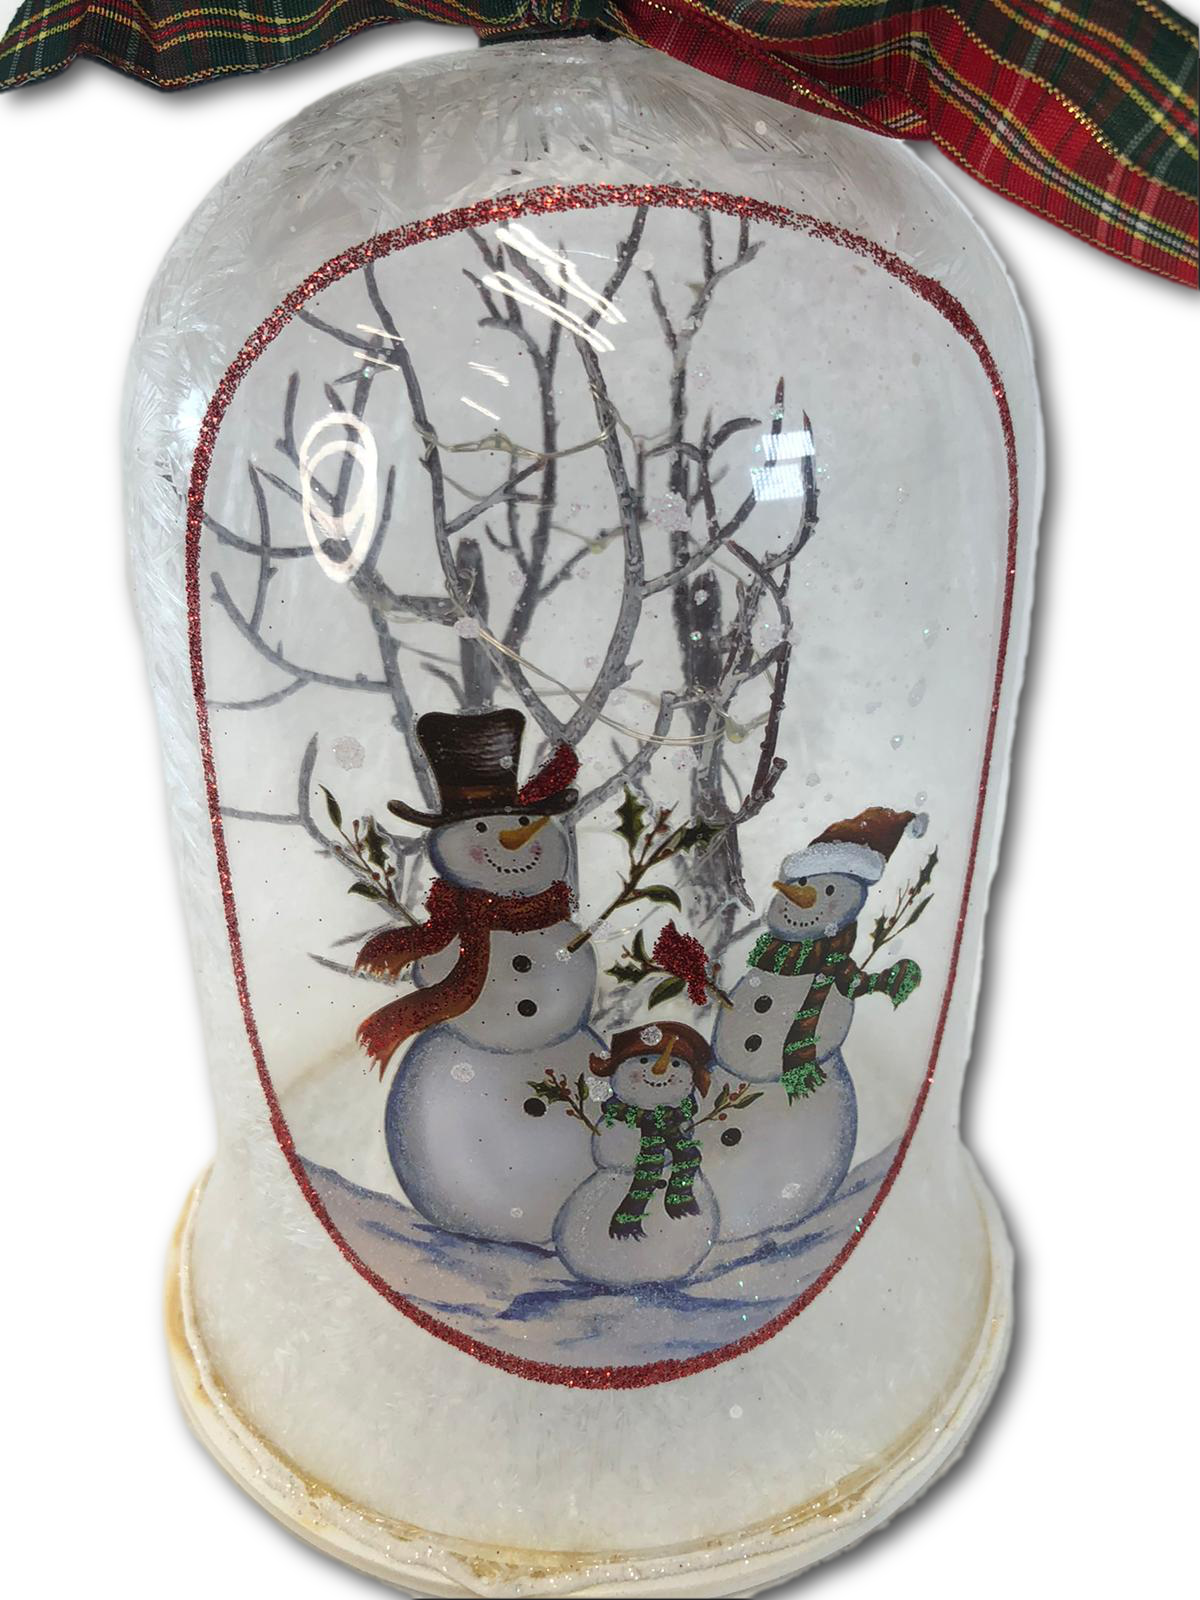 9" Illuminated Glass Bell with Interior Trees & Scene by Valerie